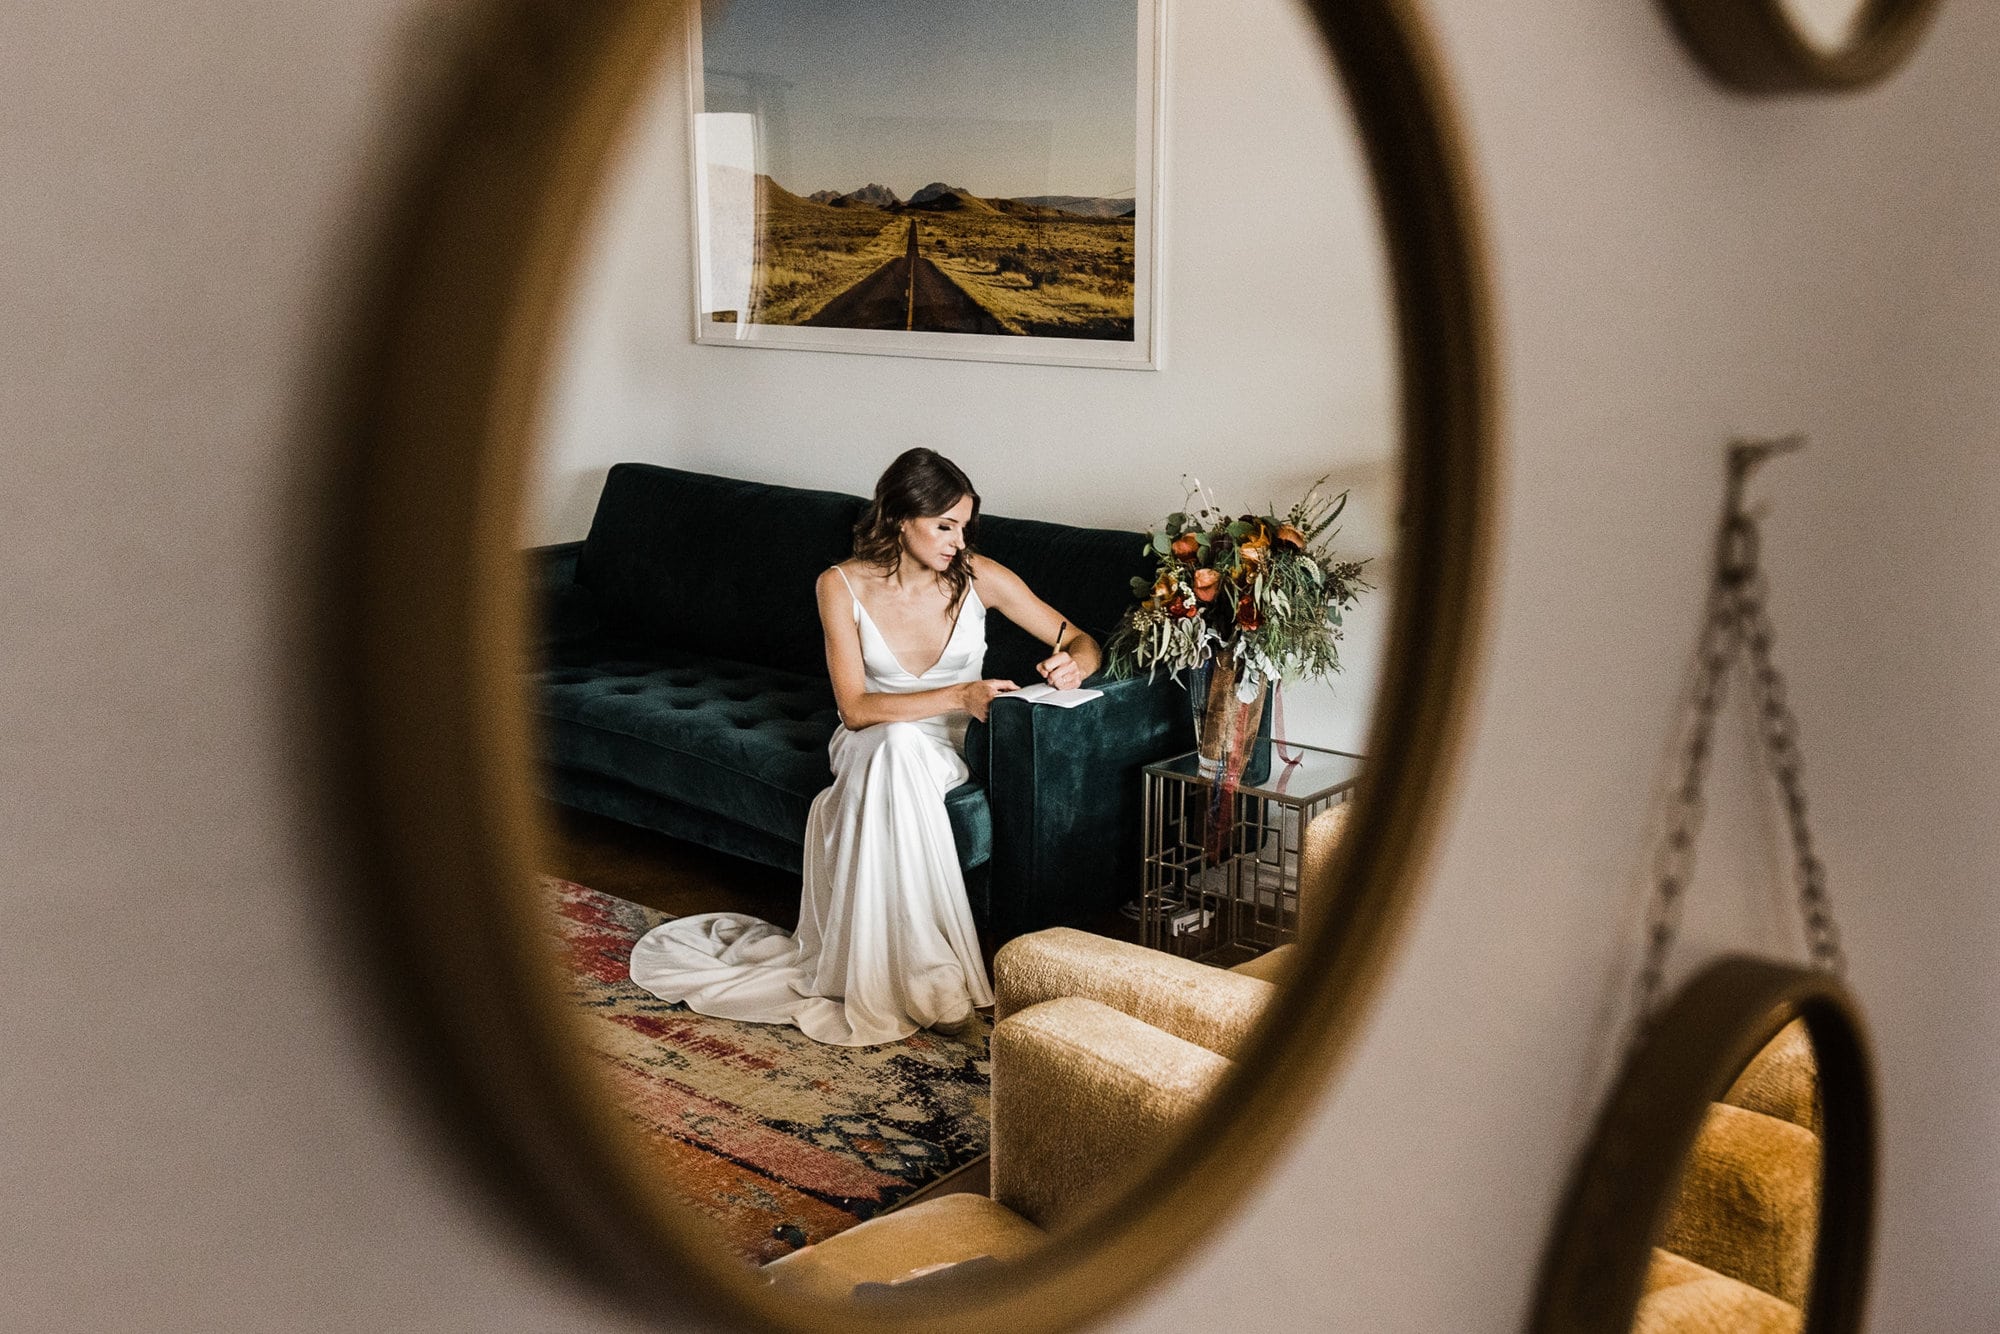 If you're planning an elopement in Joshua Tree National Park, then this is the guide is made for you. Everything you need to know about planning a desert elopement can be found here.